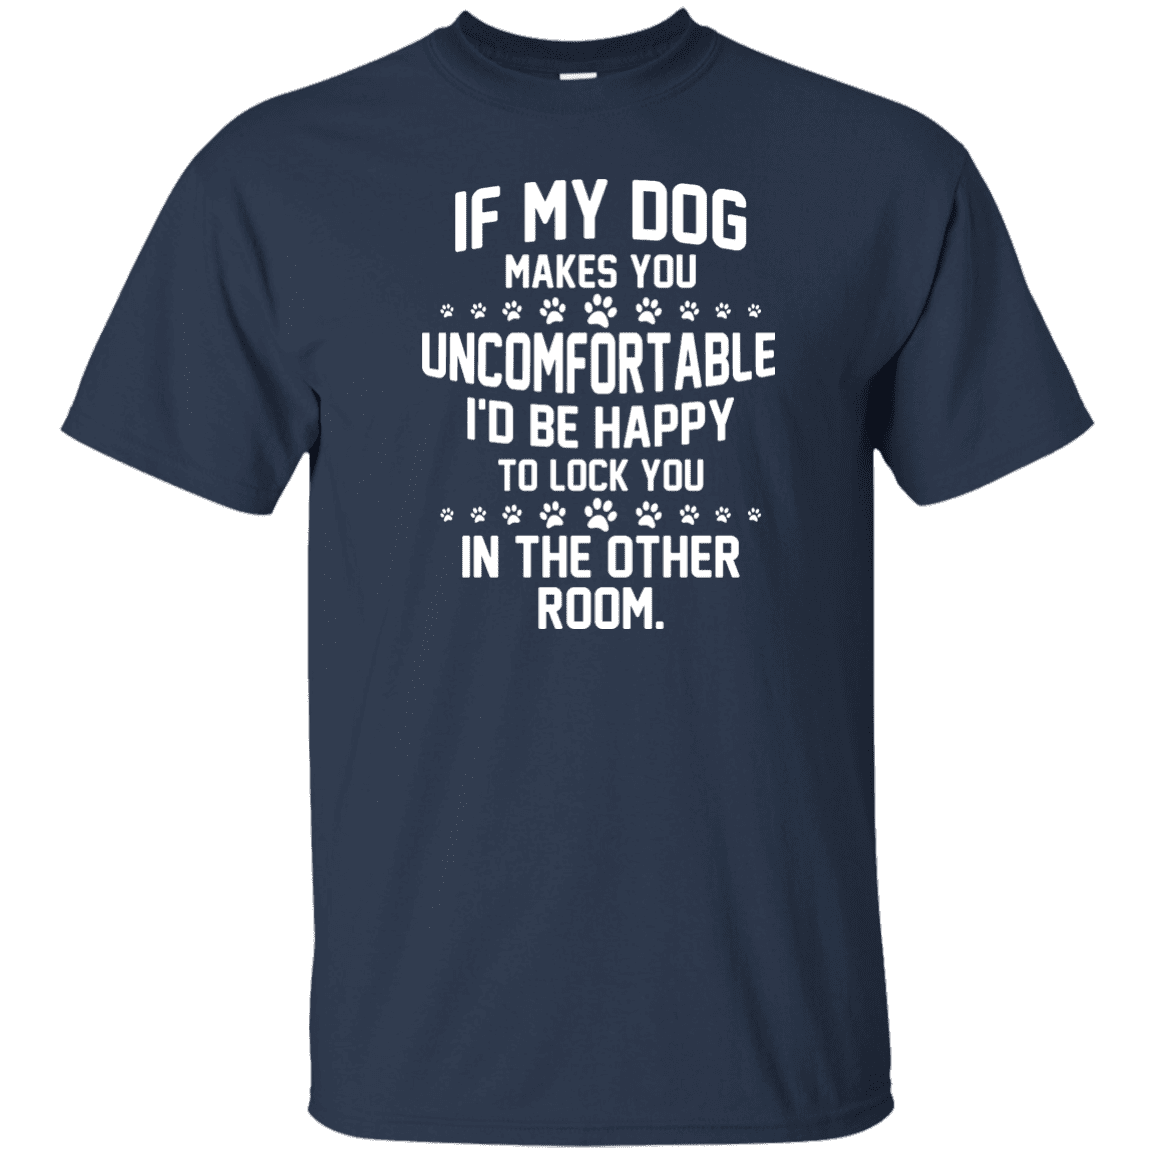 If My Dog Makes You Uncomfortable - T Shirt.